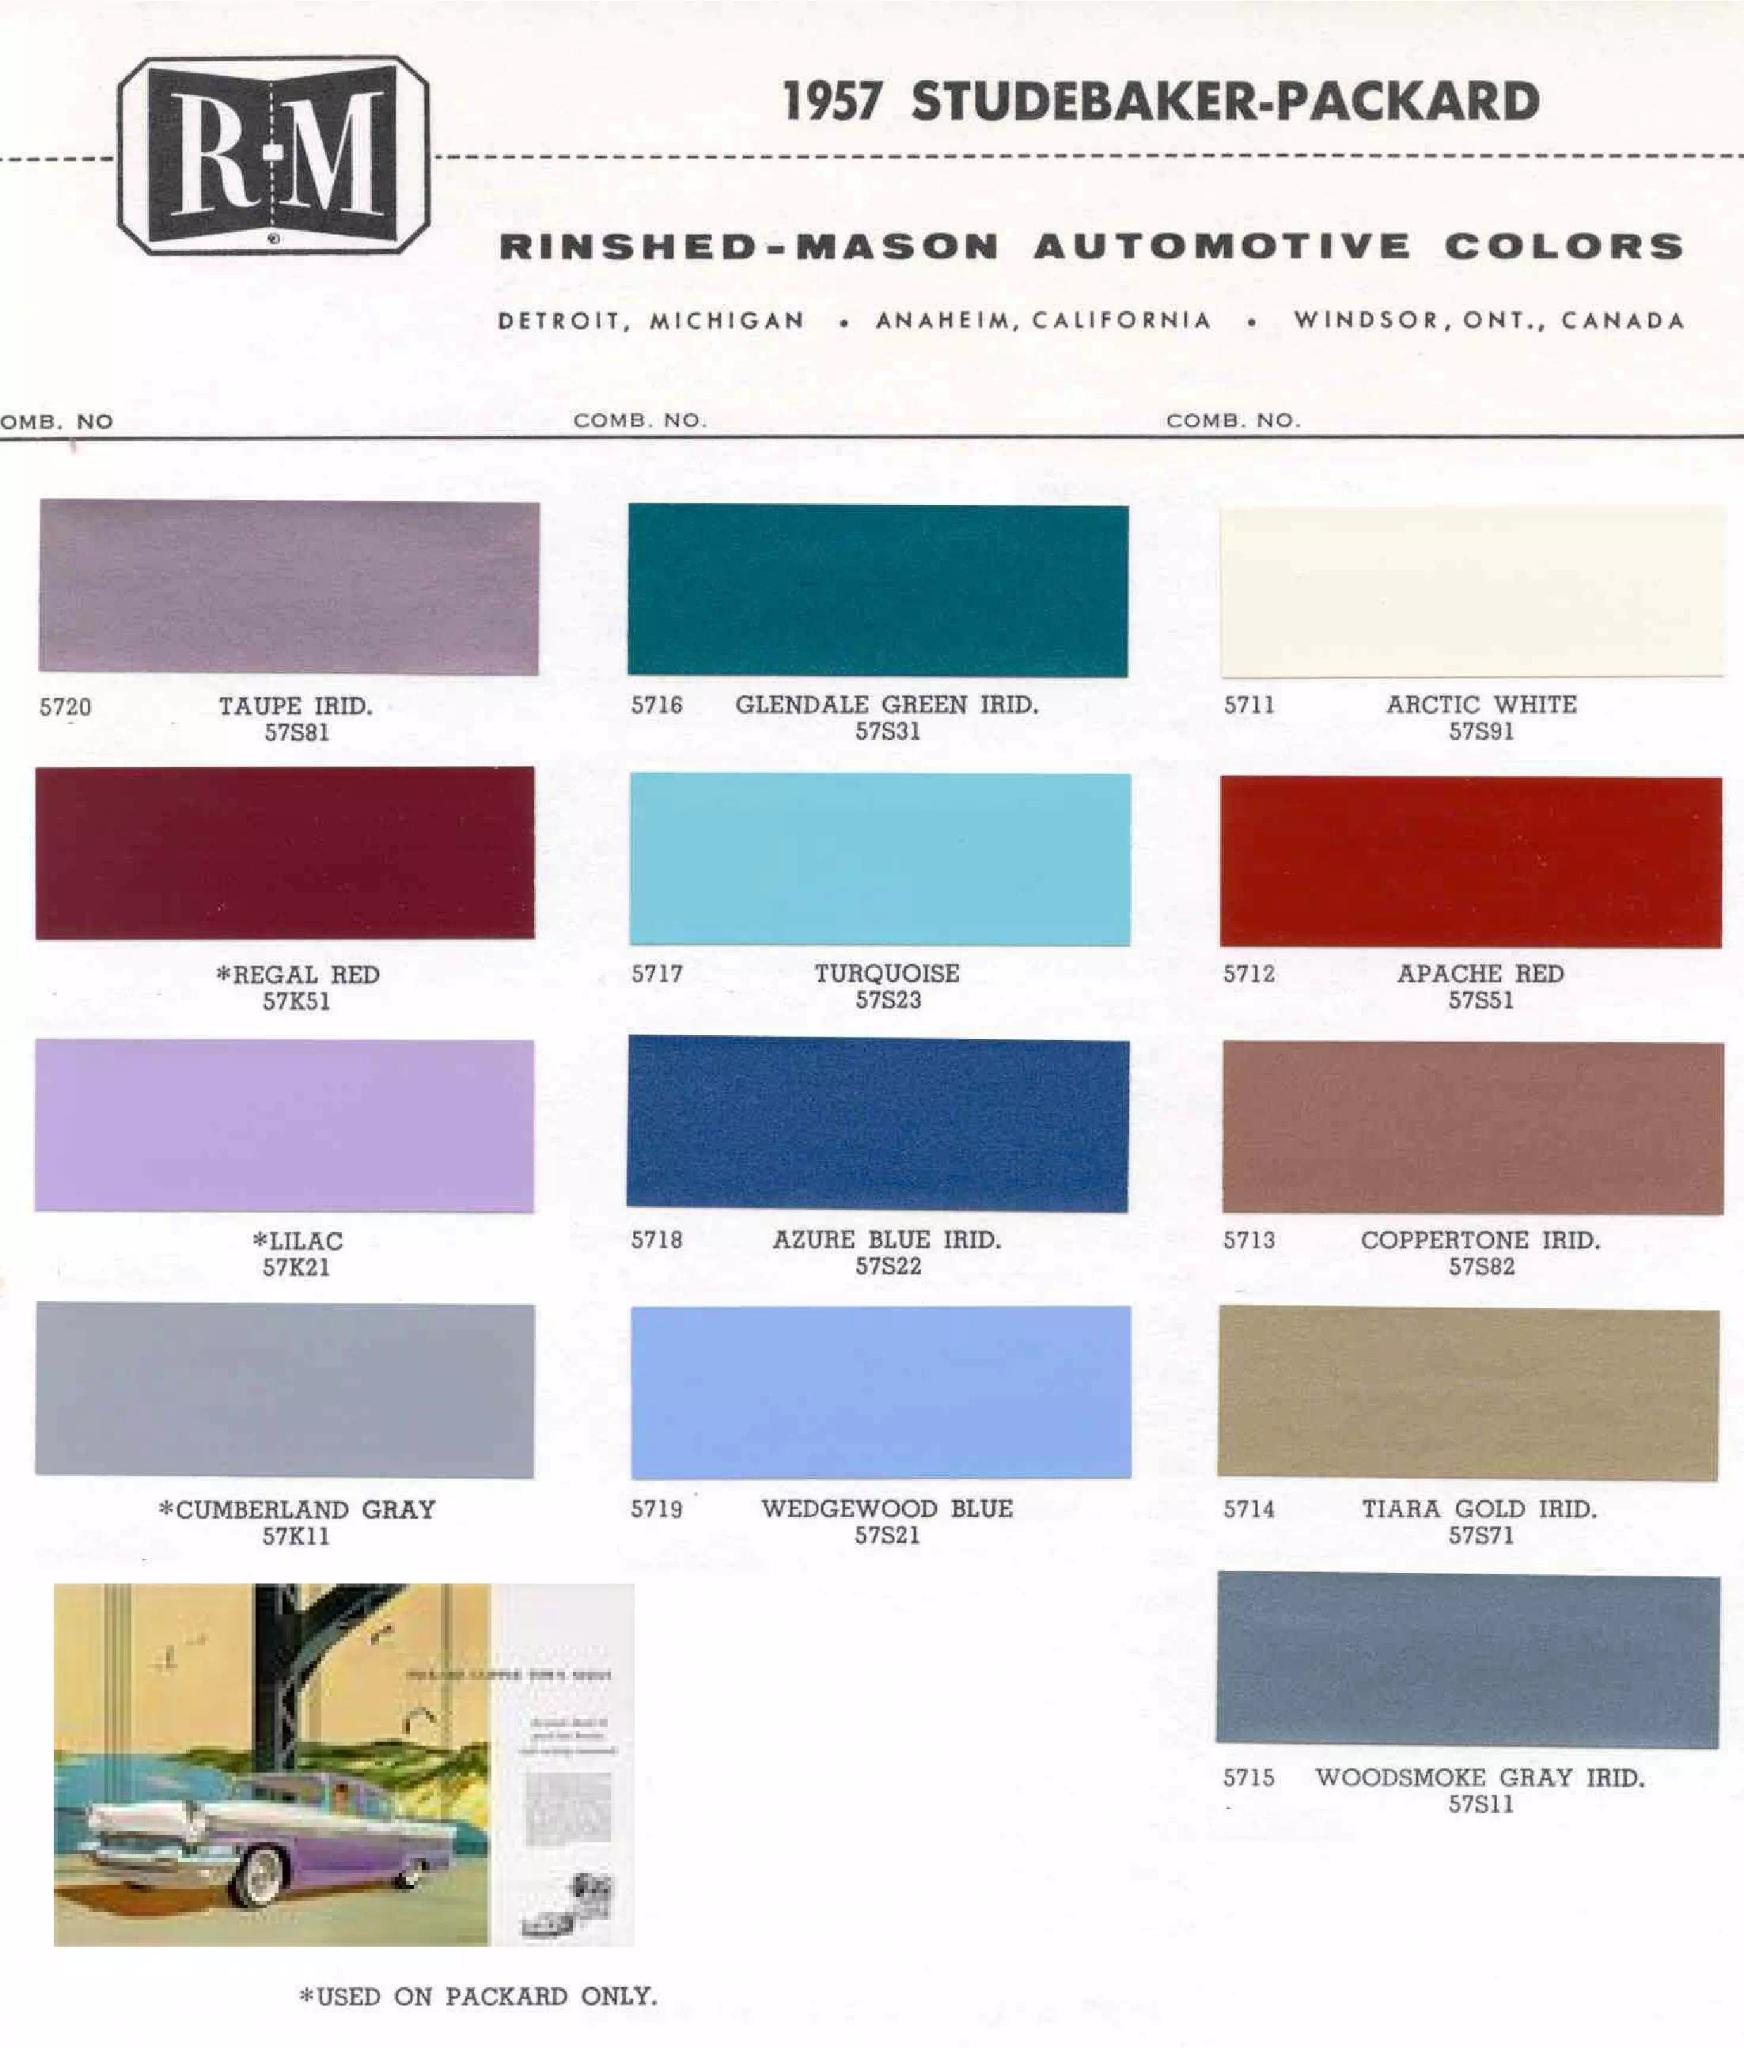 Summary of all Colors and Codes used on Packard